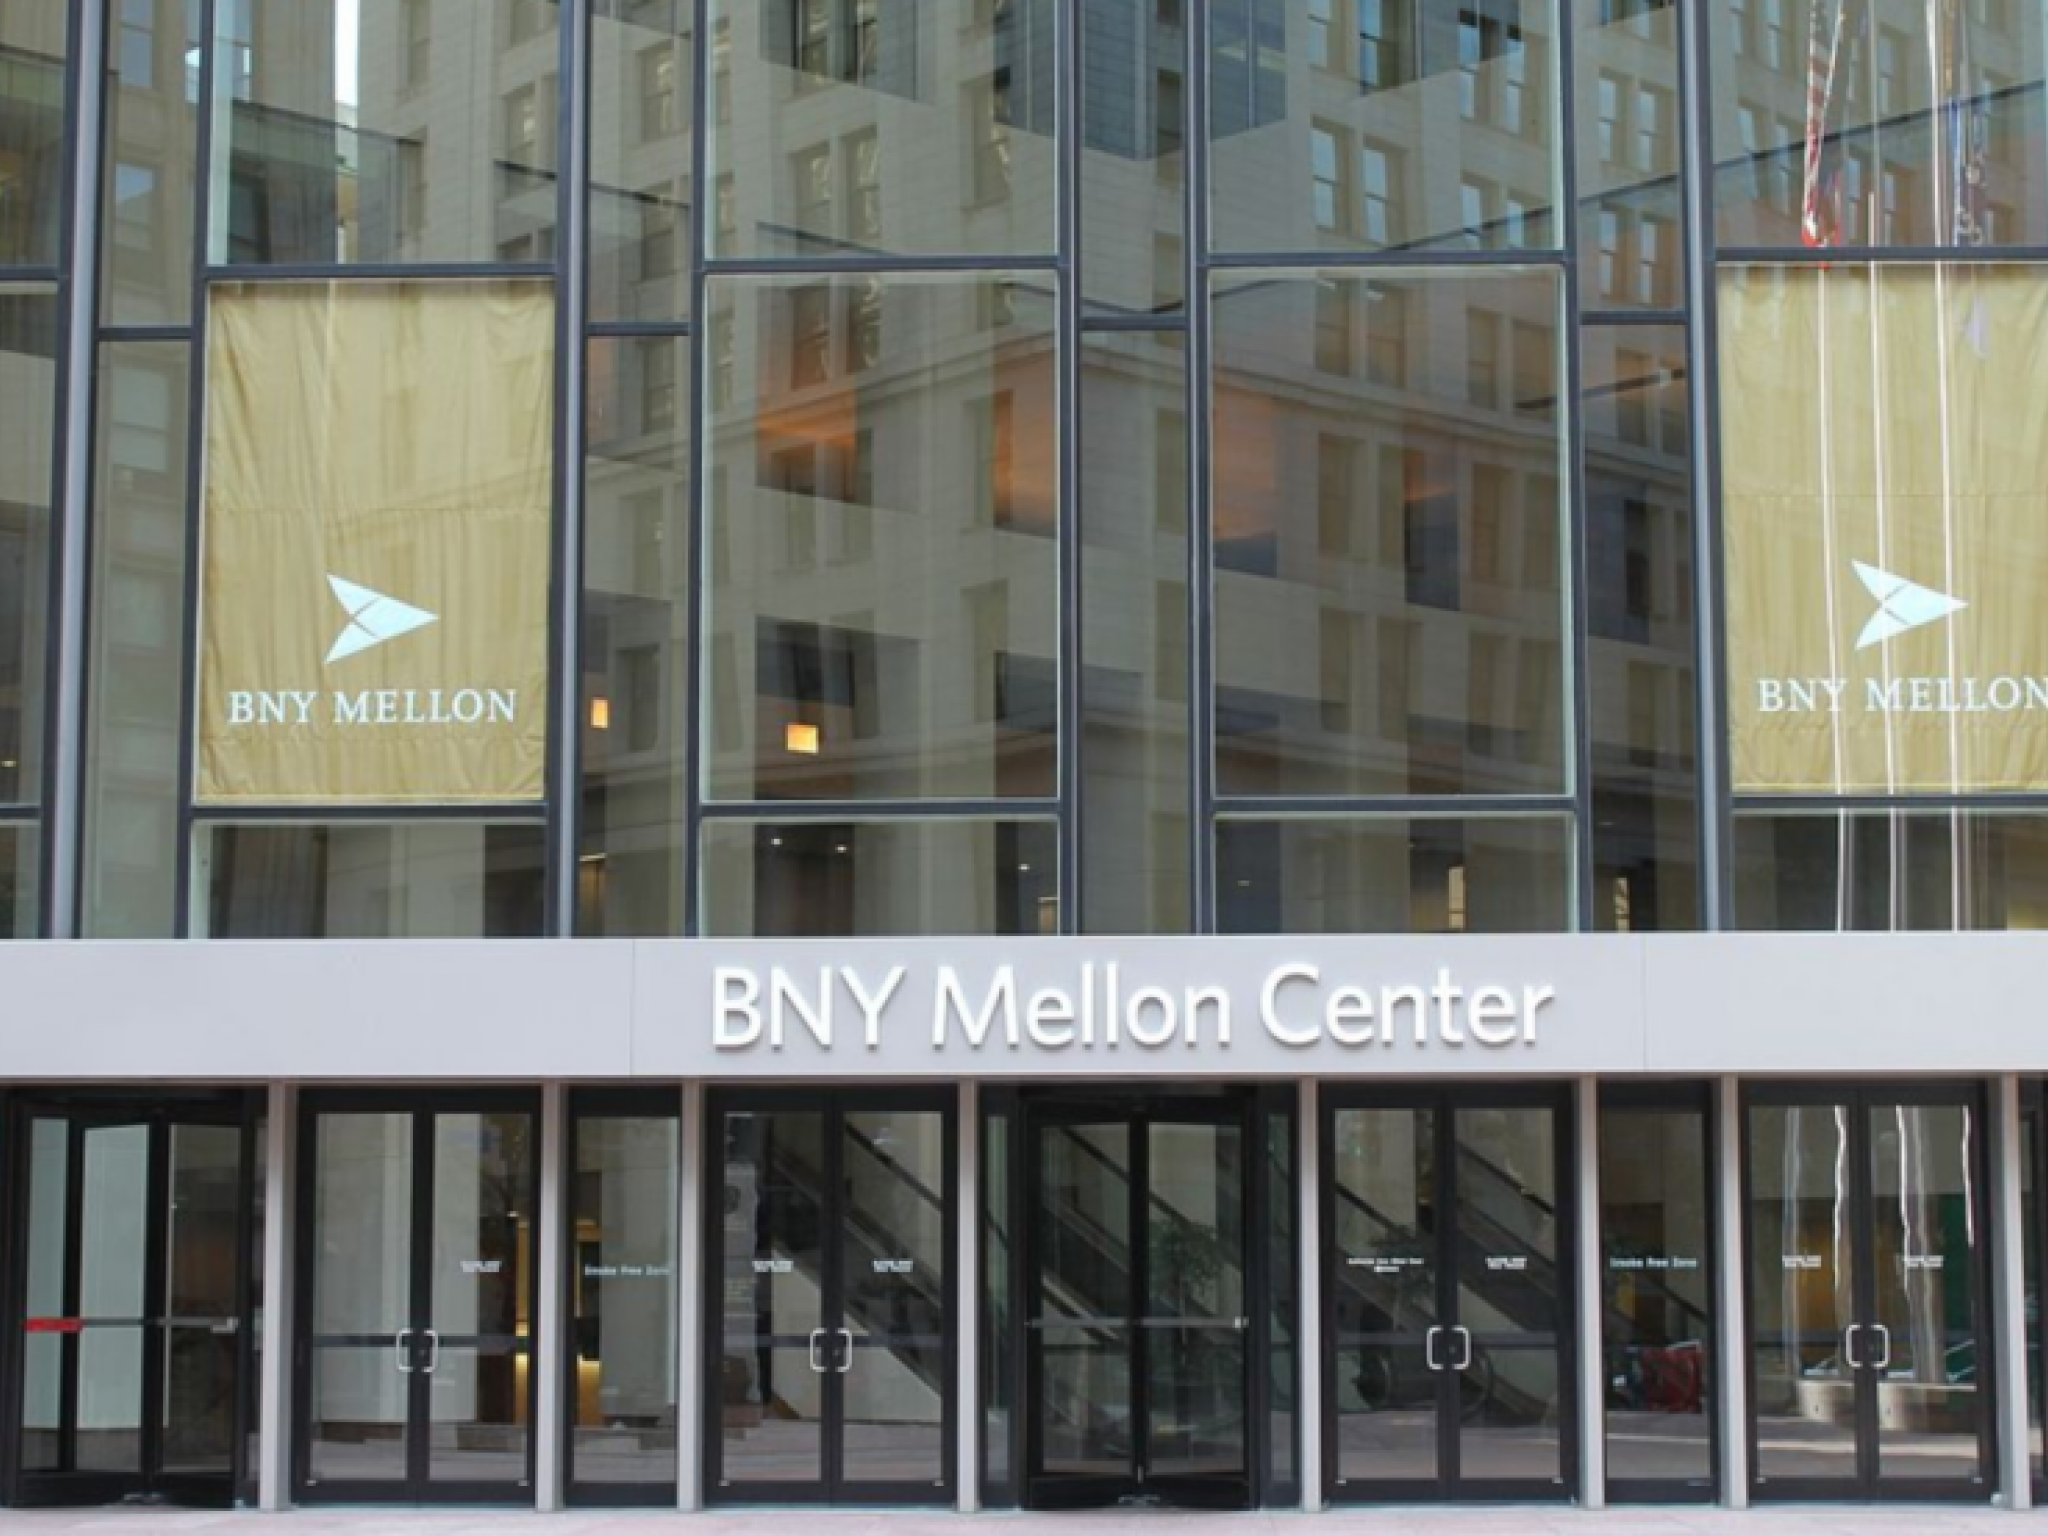  whats-going-on-with-bank-of-new-york-mellon-shares-after-reporting-q1-results 